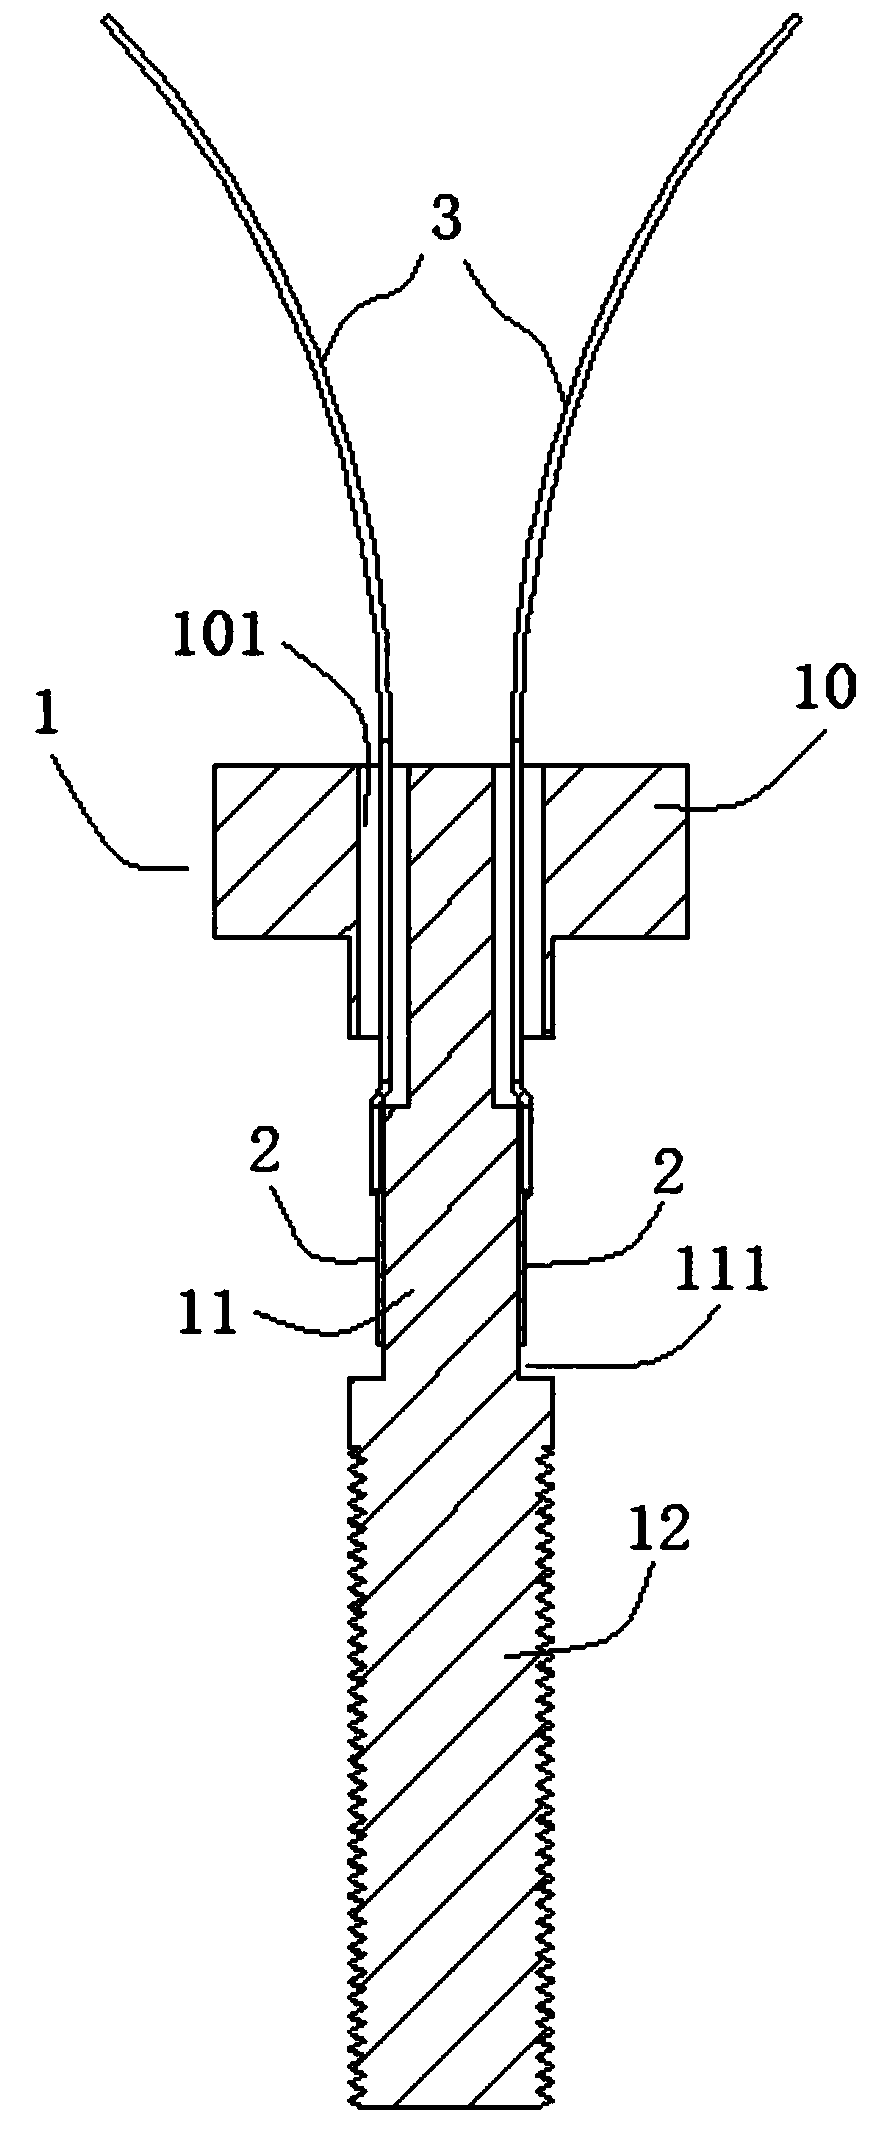 Axial force measuring bolt structure and measuring method